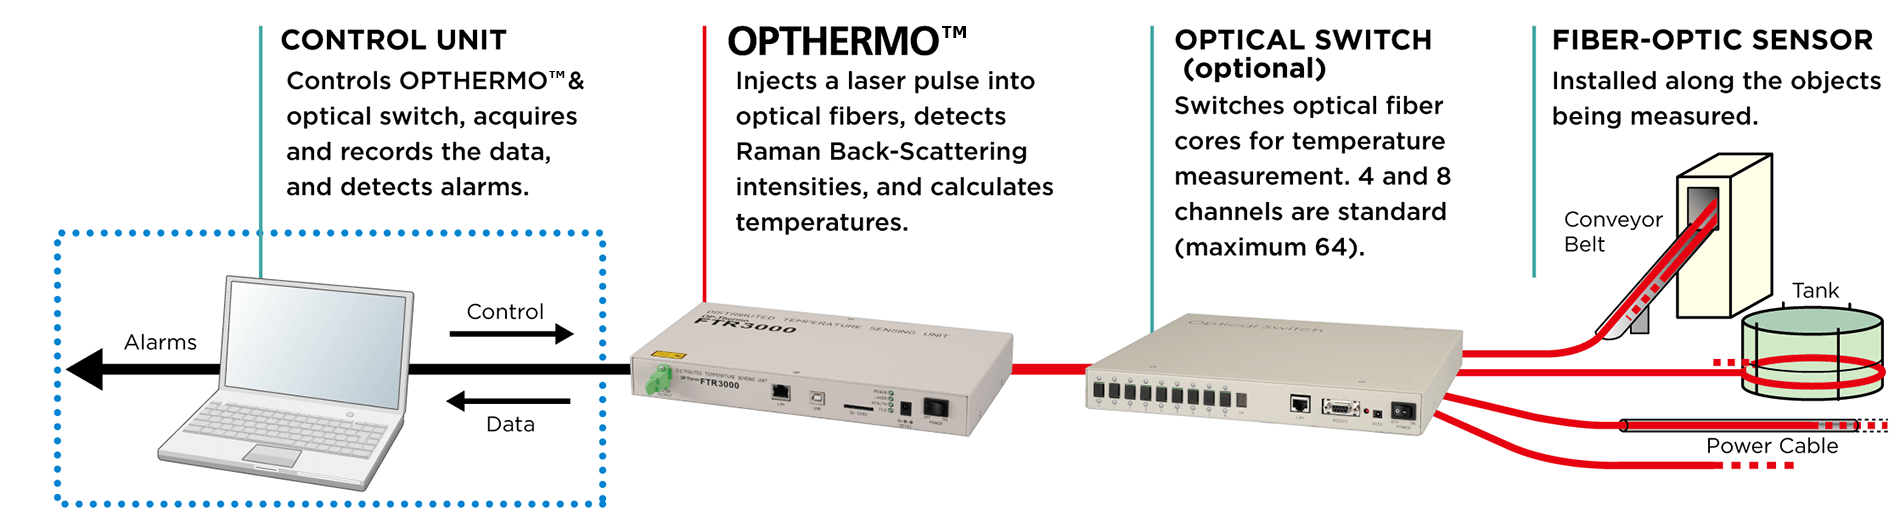 OPTHERMO is a distributed temperature sensing system that uses optical fibers as sensors.